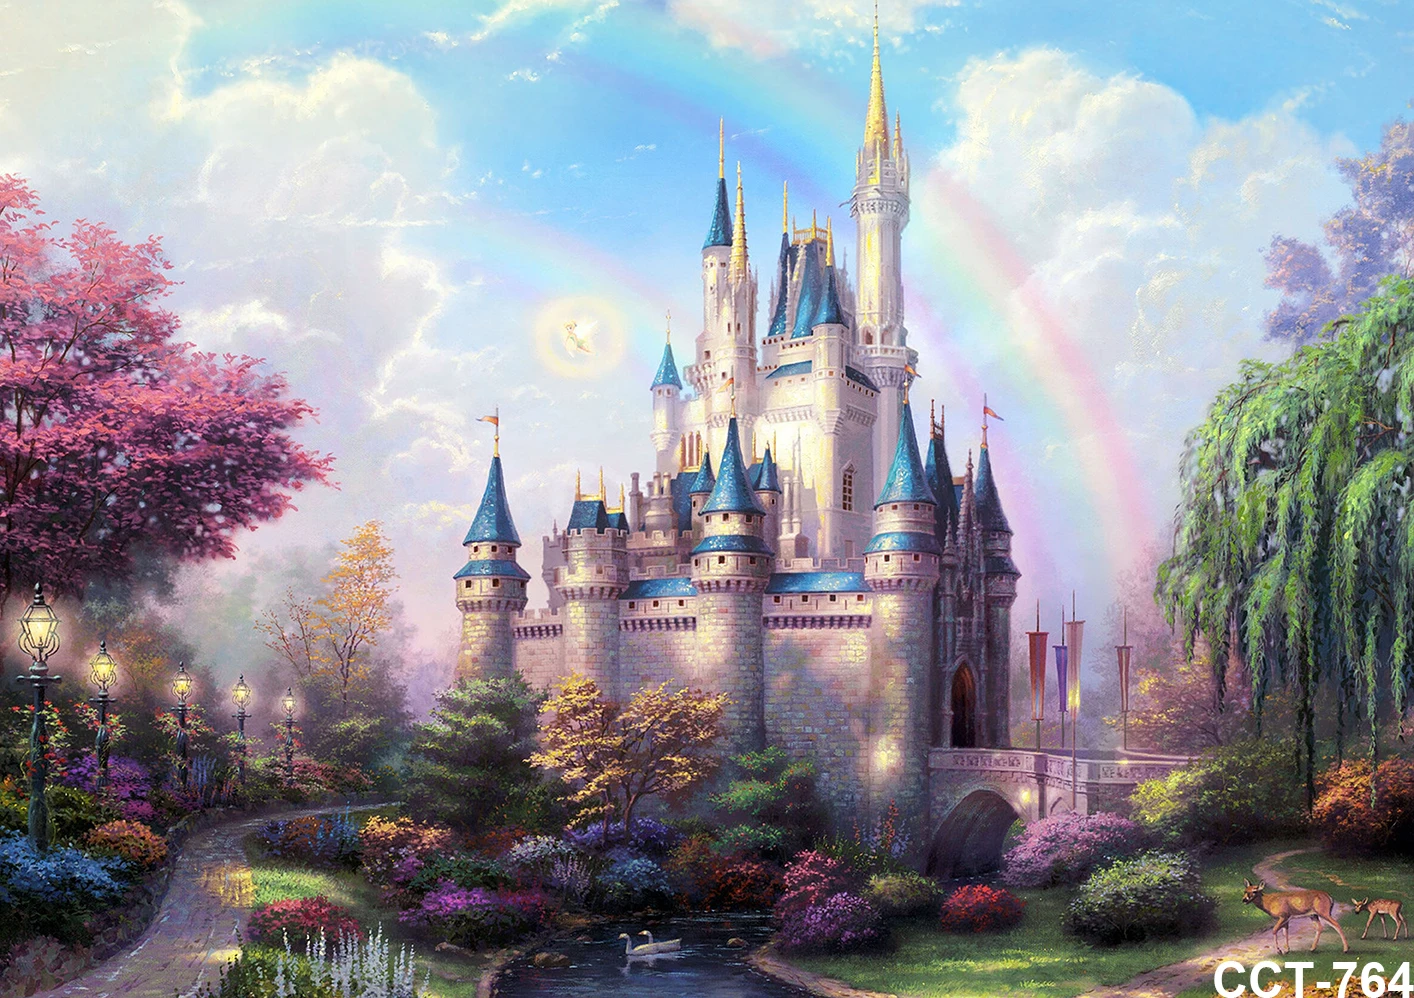 Cinderella Magic Castle Backgrounds for Photography Little Princess Rainbow Bridge Shade Trail Baby Shower Photography Photo enlarge